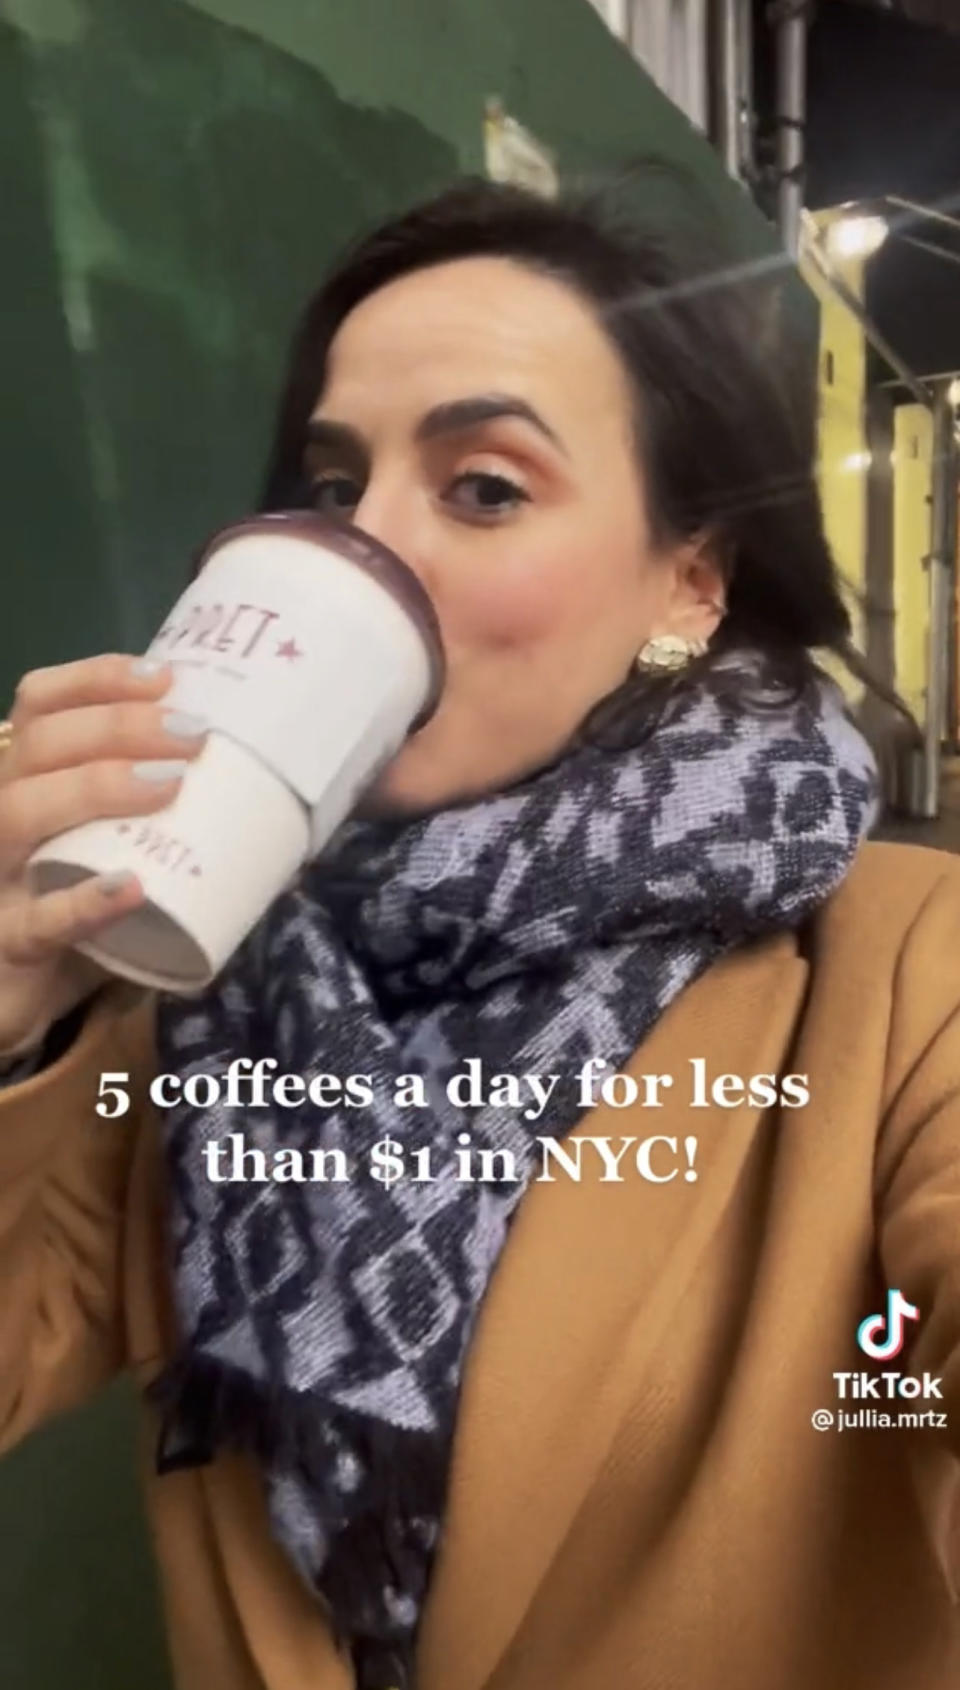 Woman drinking coffee with the text "Getting 5 coffees a day for less than $1 in NYC!"